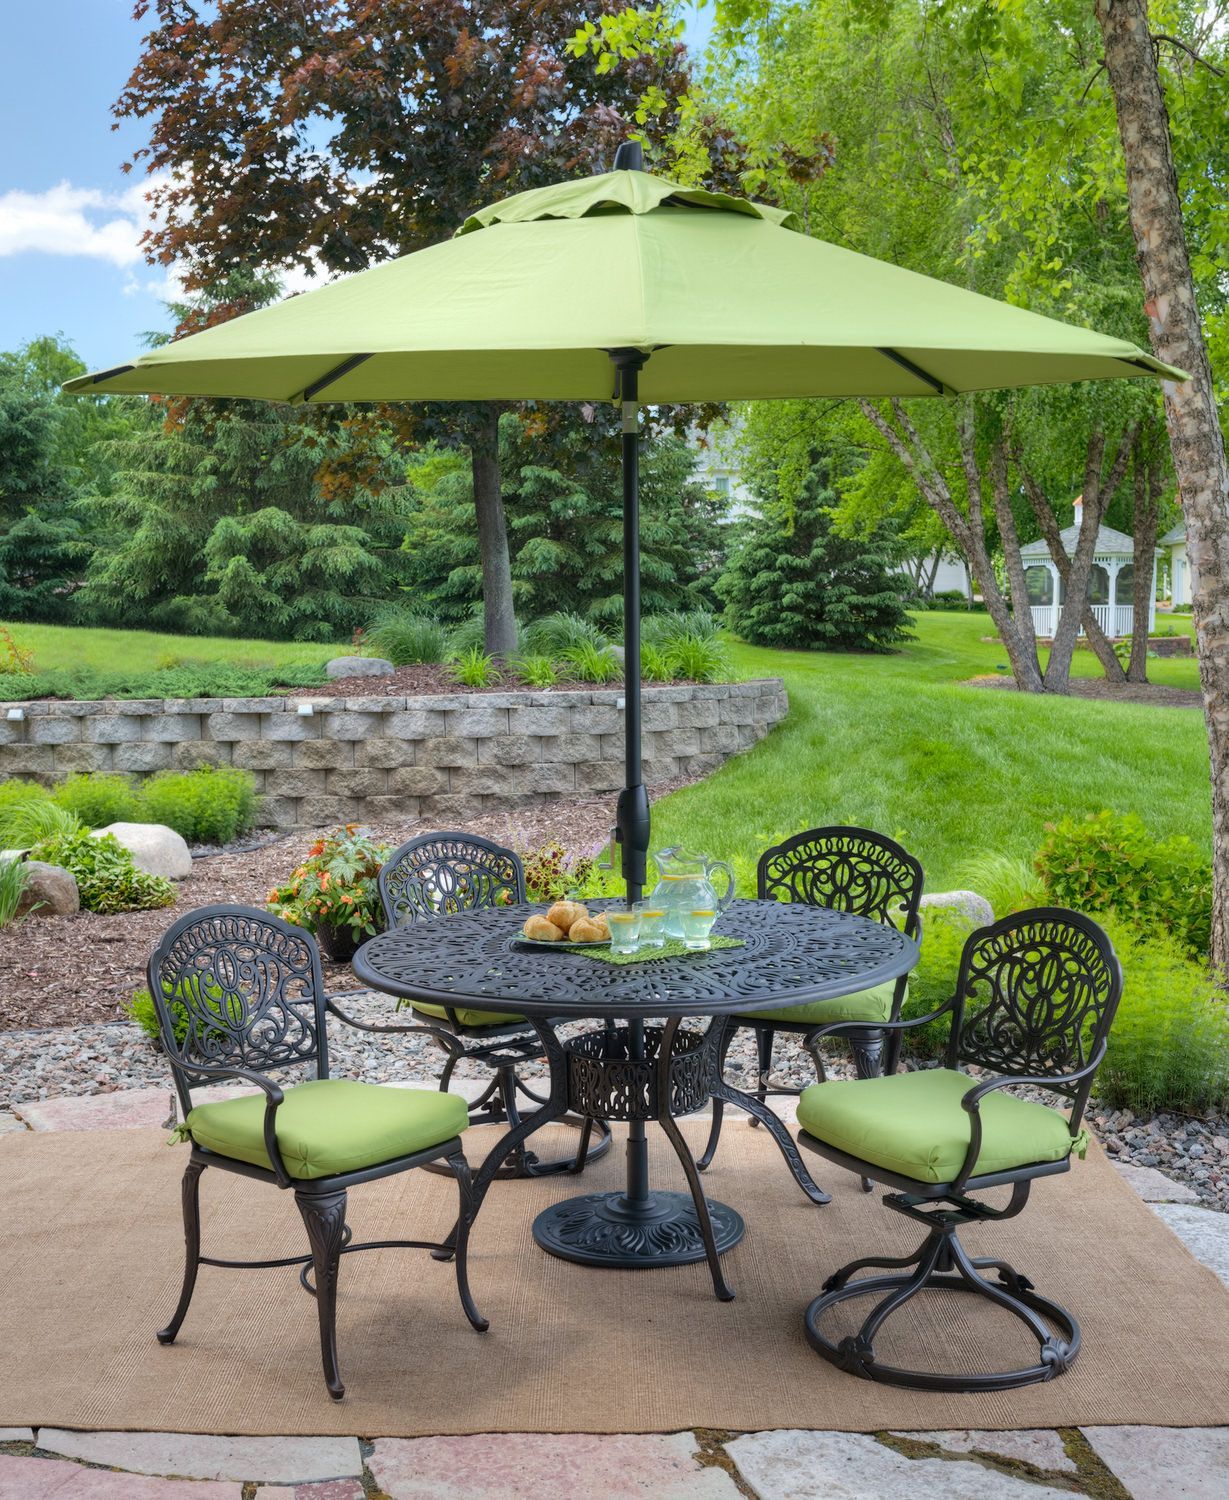 Tuscany 5 Piece Patio Dining Sethanamint | Hom Furniture | Patio With Regard To 5 Piece Outdoor Bench Dining Sets (View 14 of 15)